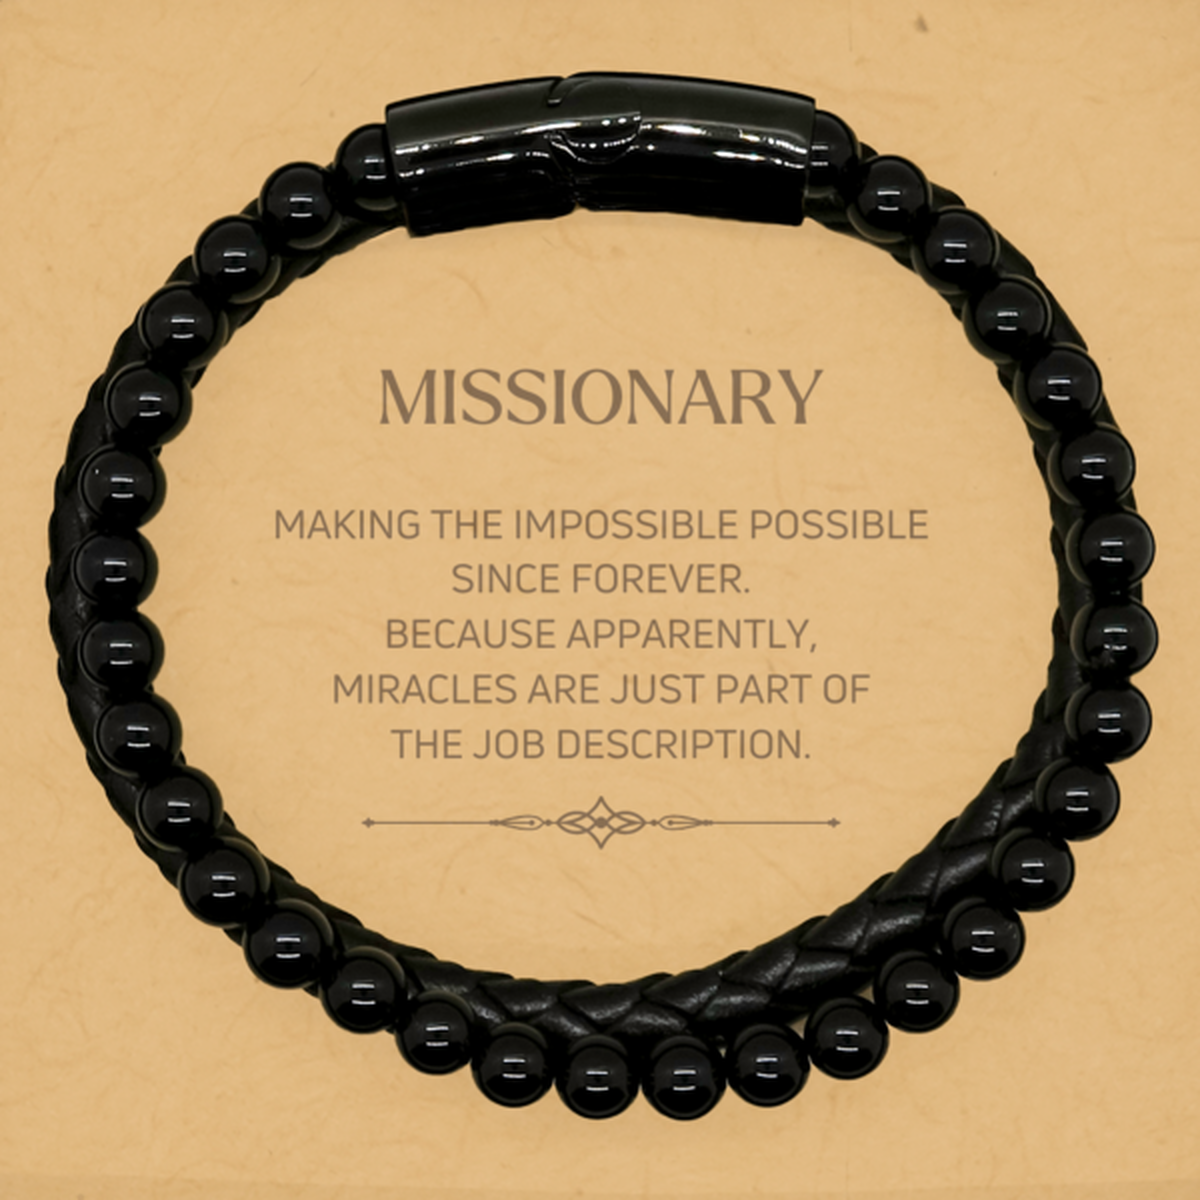 Funny Missionary Gifts, Miracles are just part of the job description, Inspirational Birthday Stone Leather Bracelets For Missionary, Men, Women, Coworkers, Friends, Boss